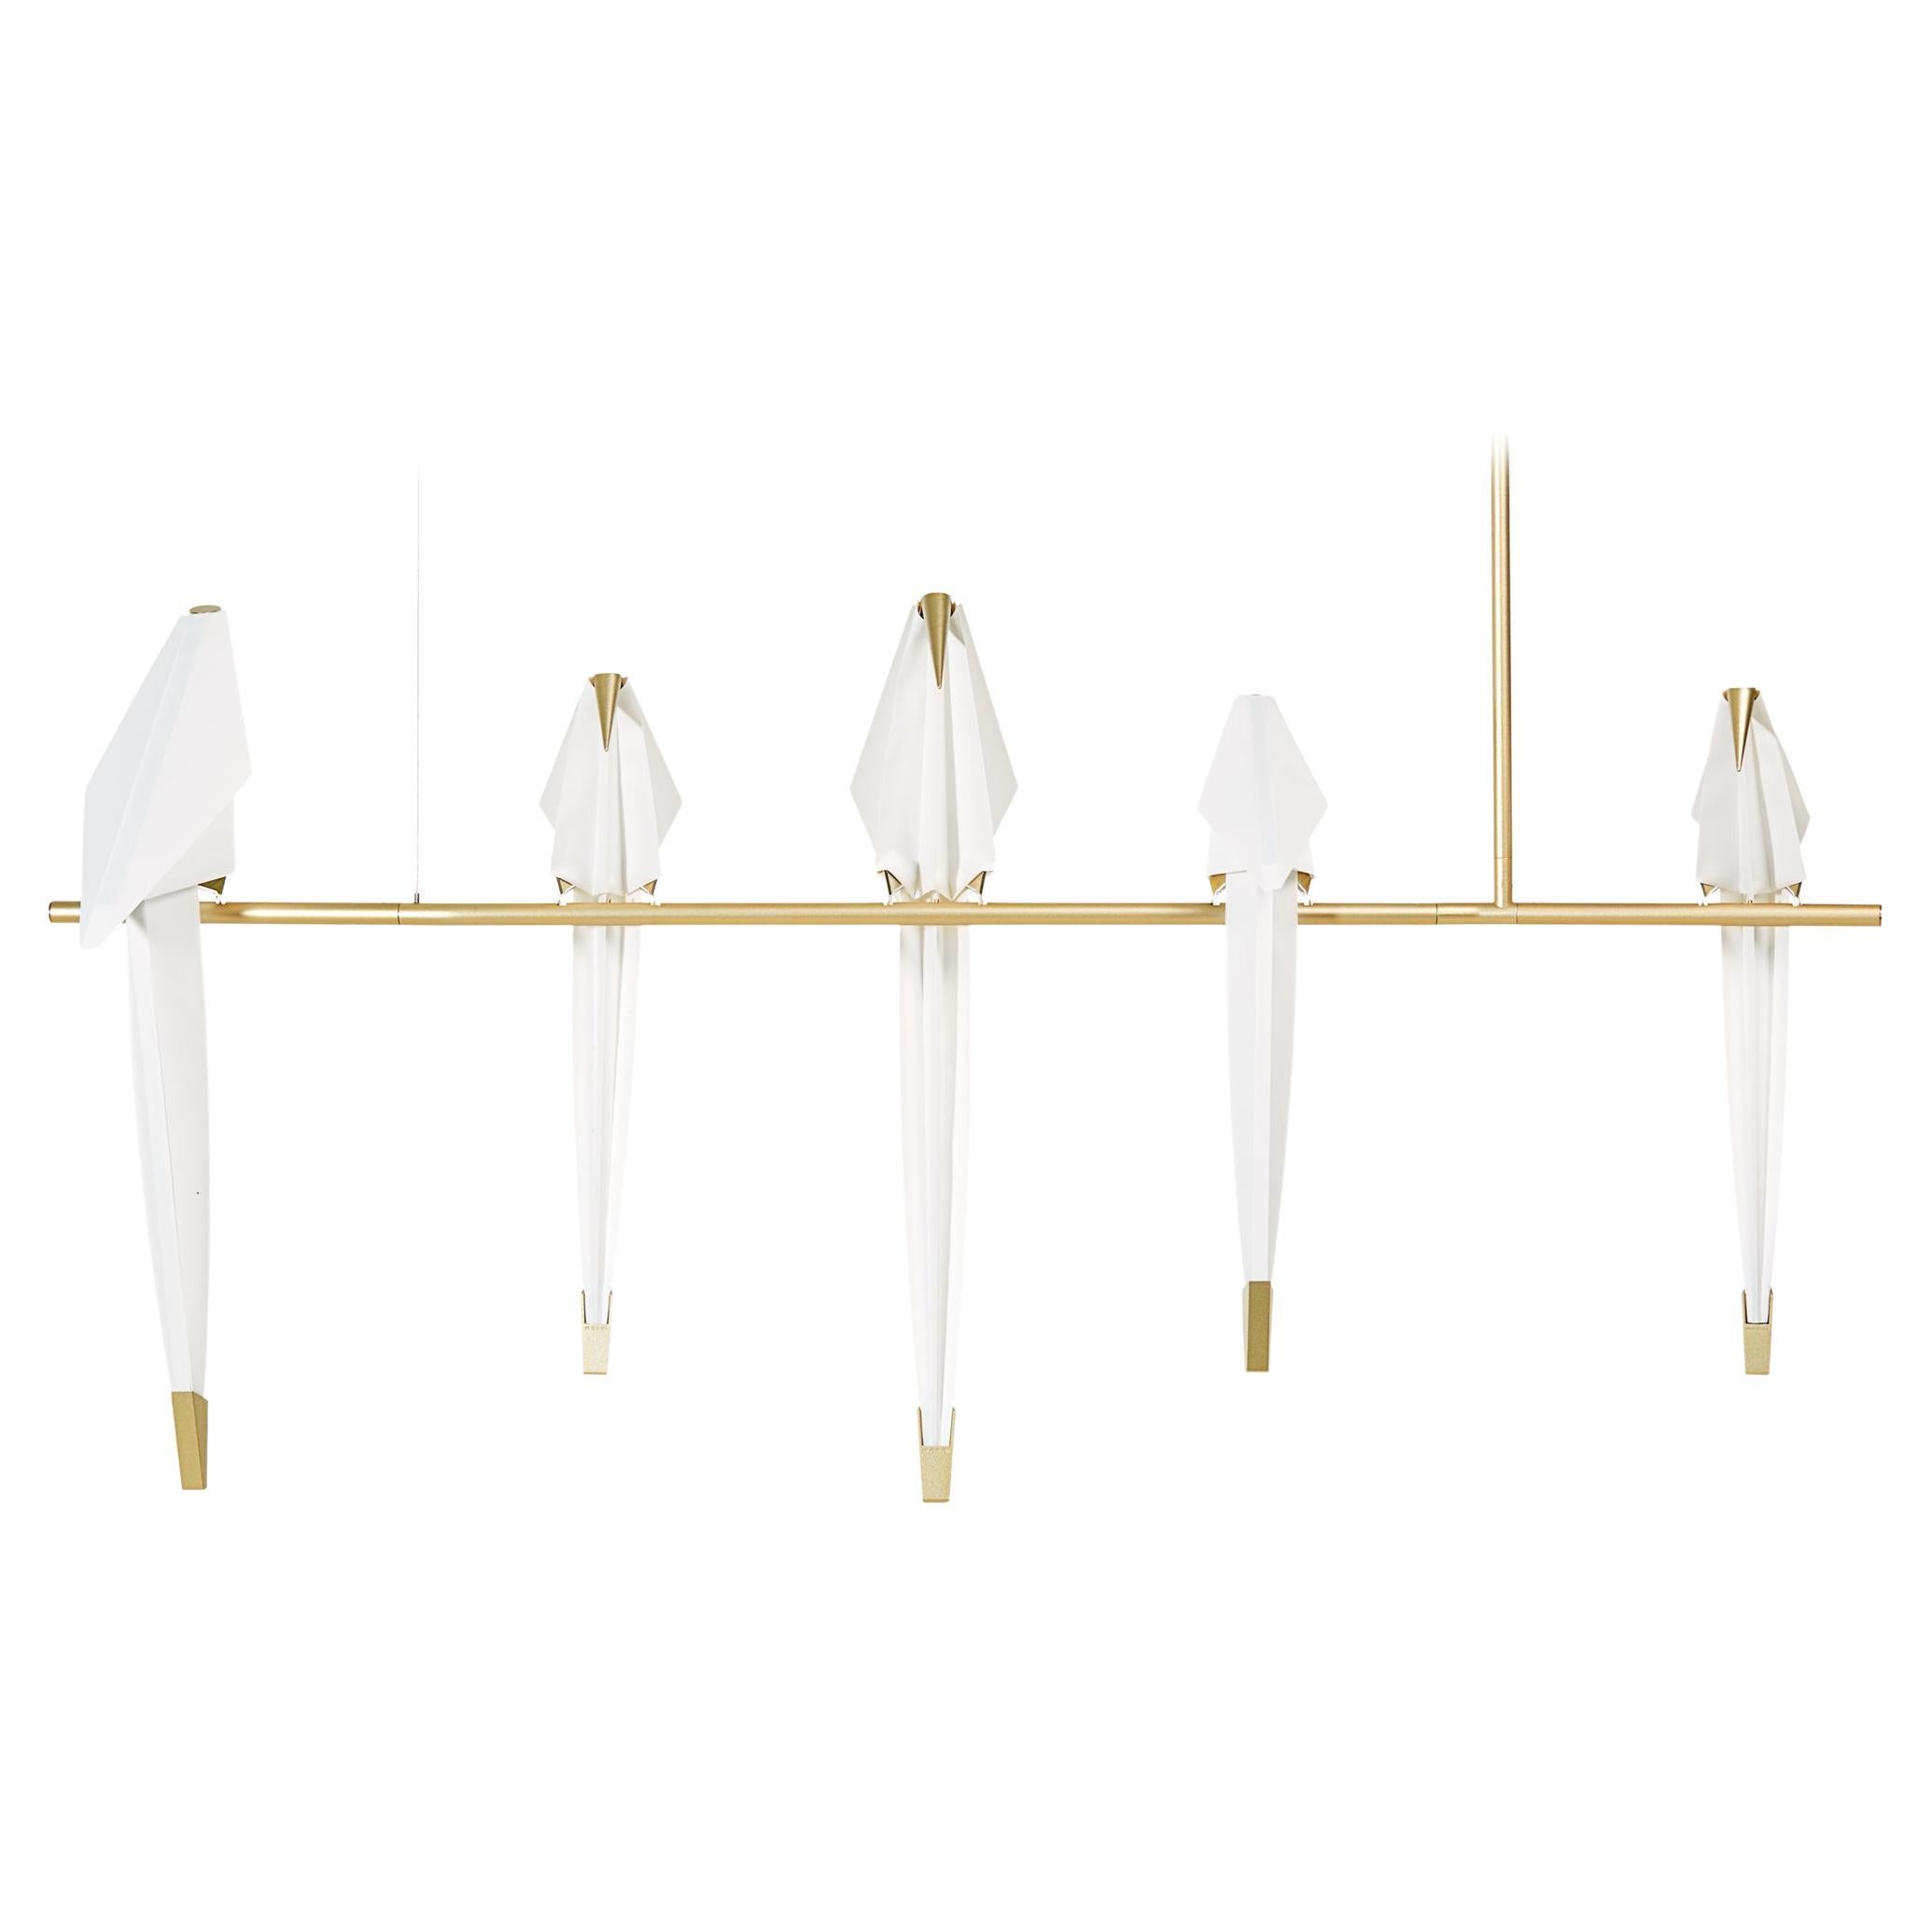 Moooi Perch Branch Small Suspension Light in Steel and Aluminium Frame, 10m For Sale